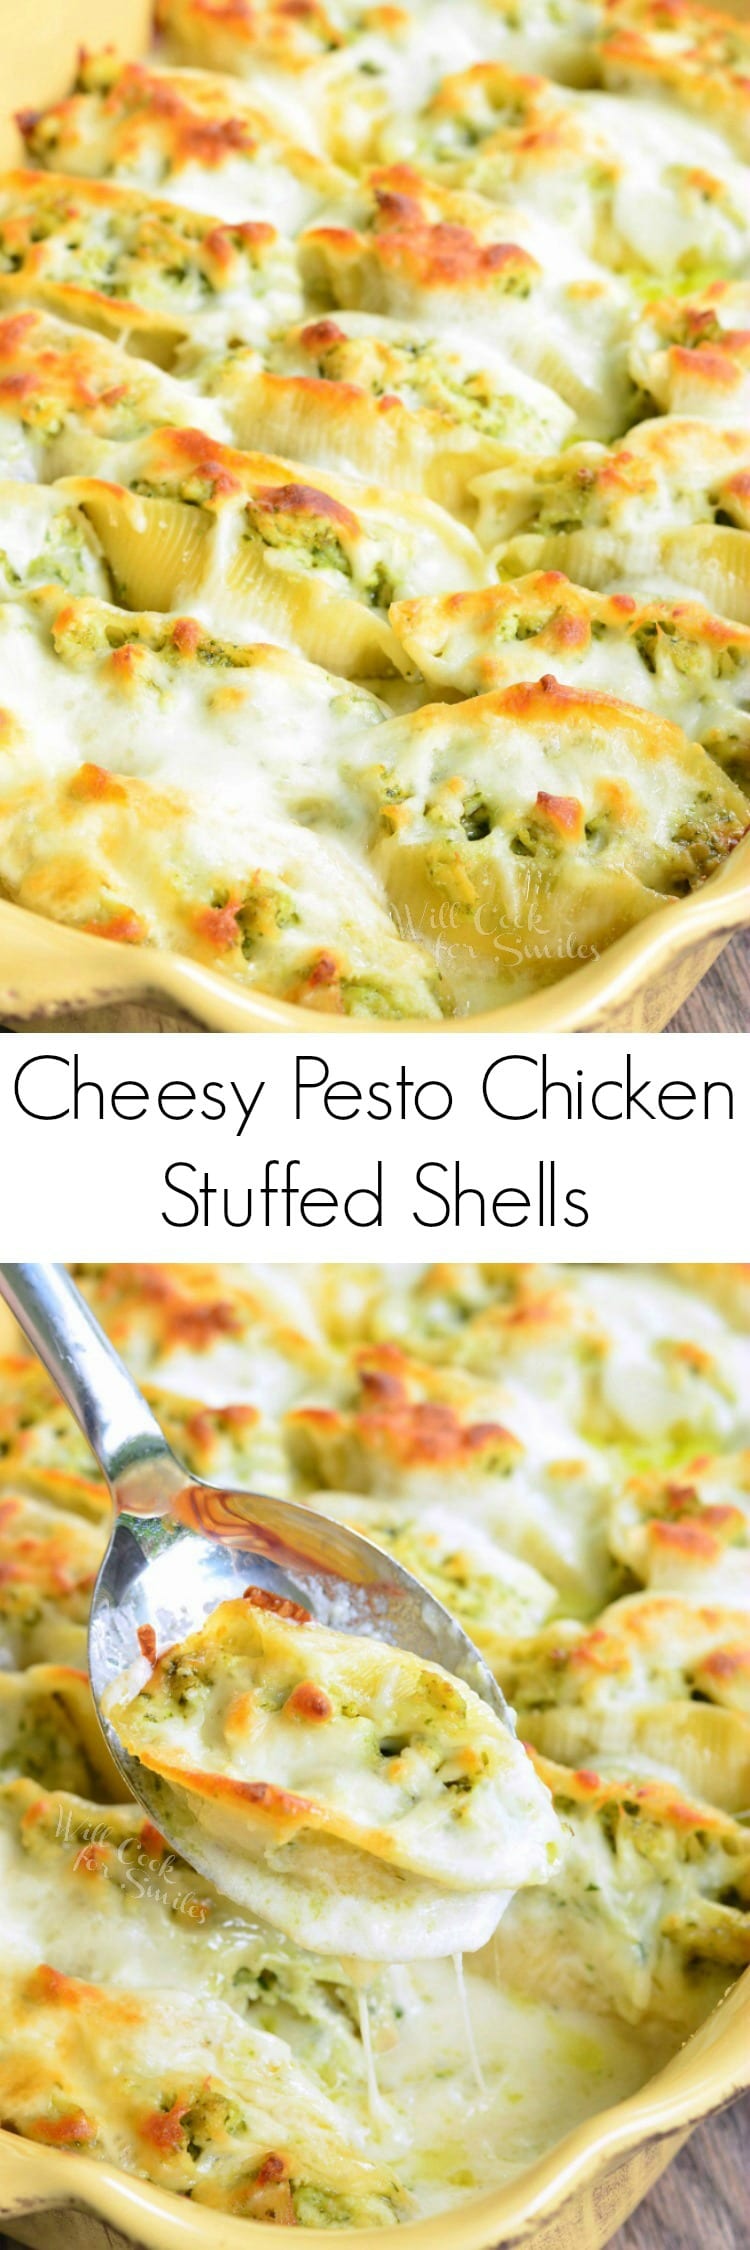  Cheesy Pesto Chicken Stuffed Shells with cheese melted on top in a yellow baking dish collage